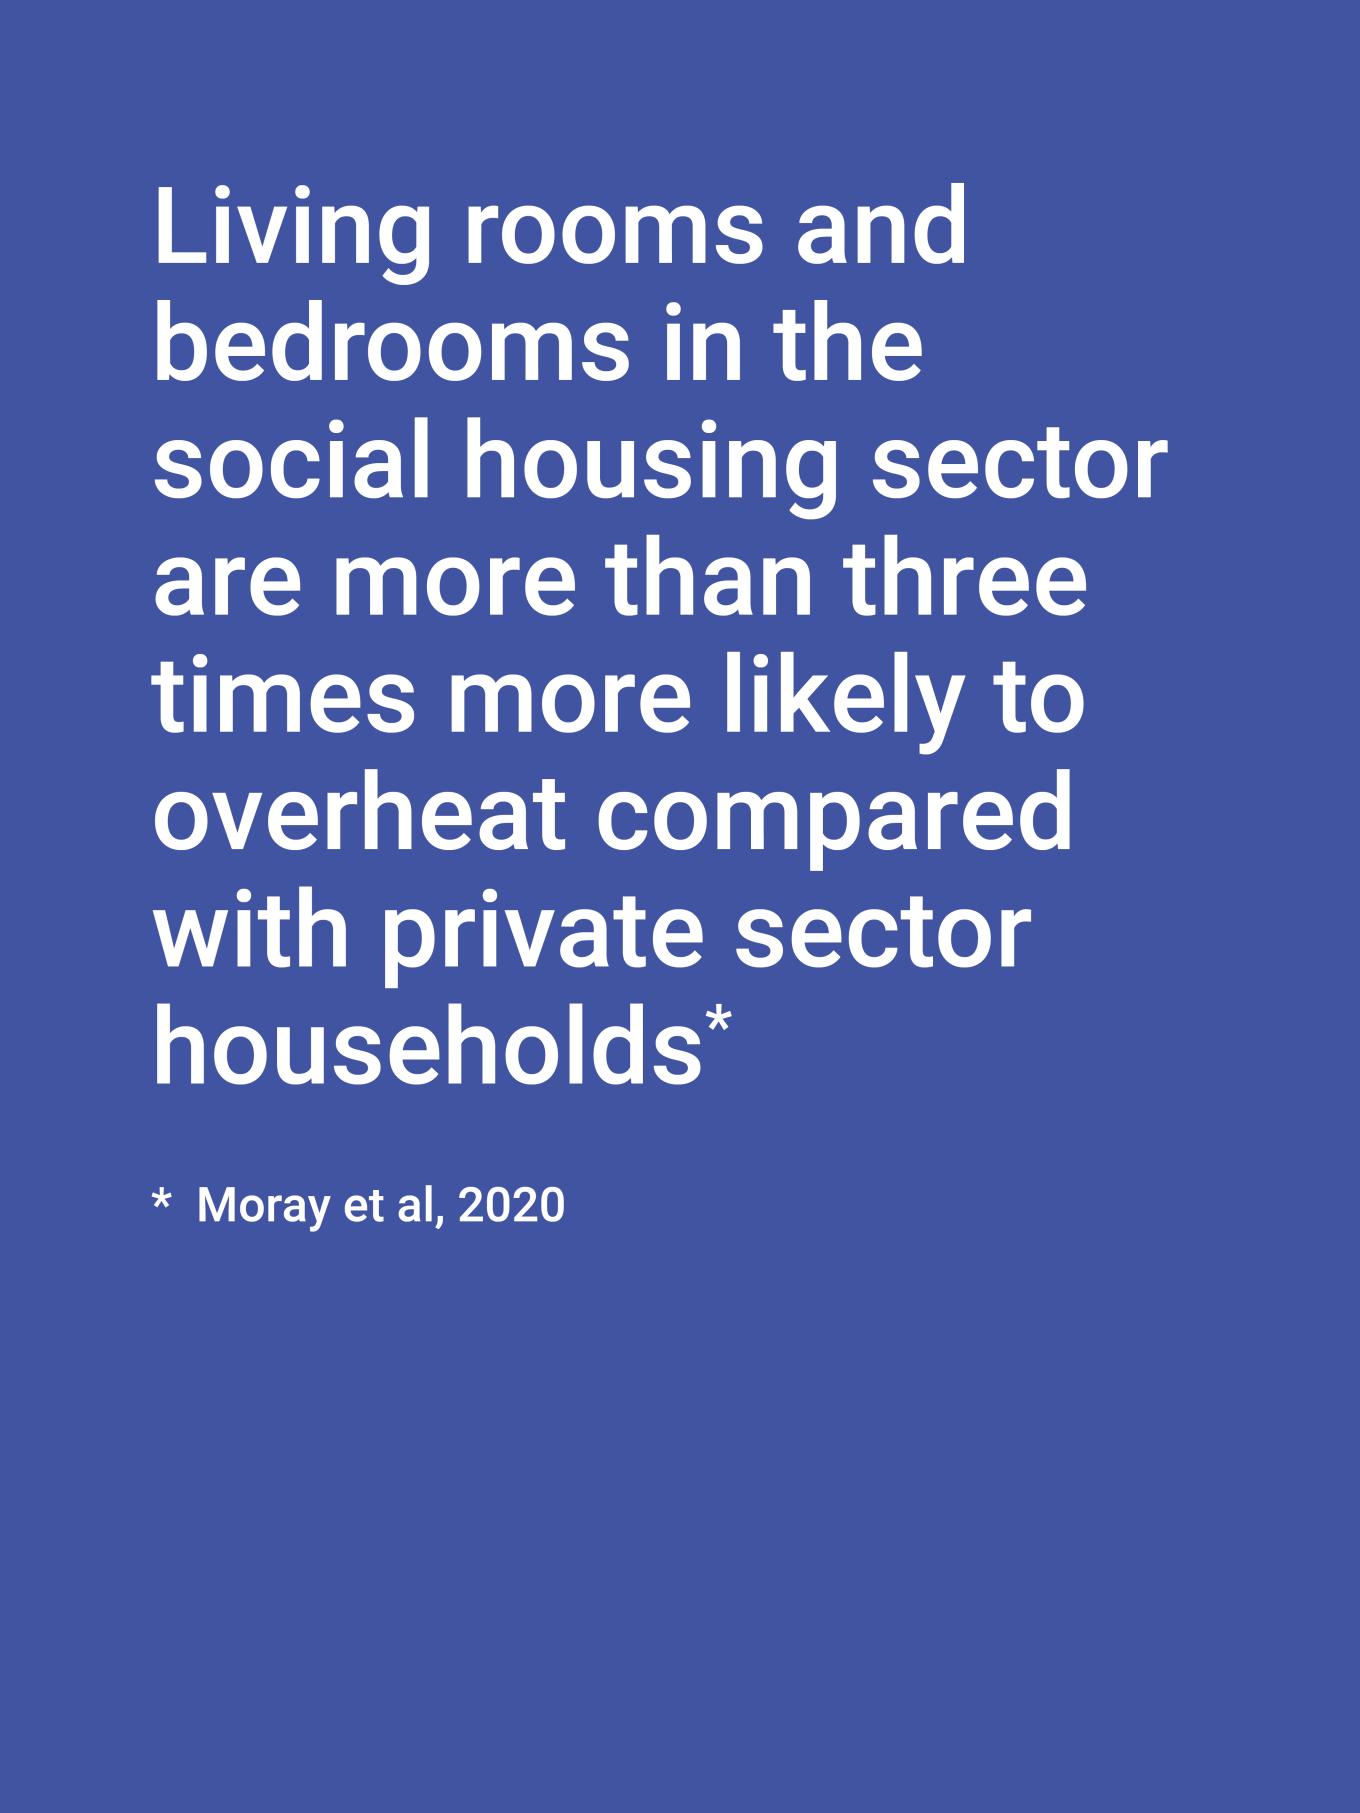 social housing bedrooms more likely to overheat